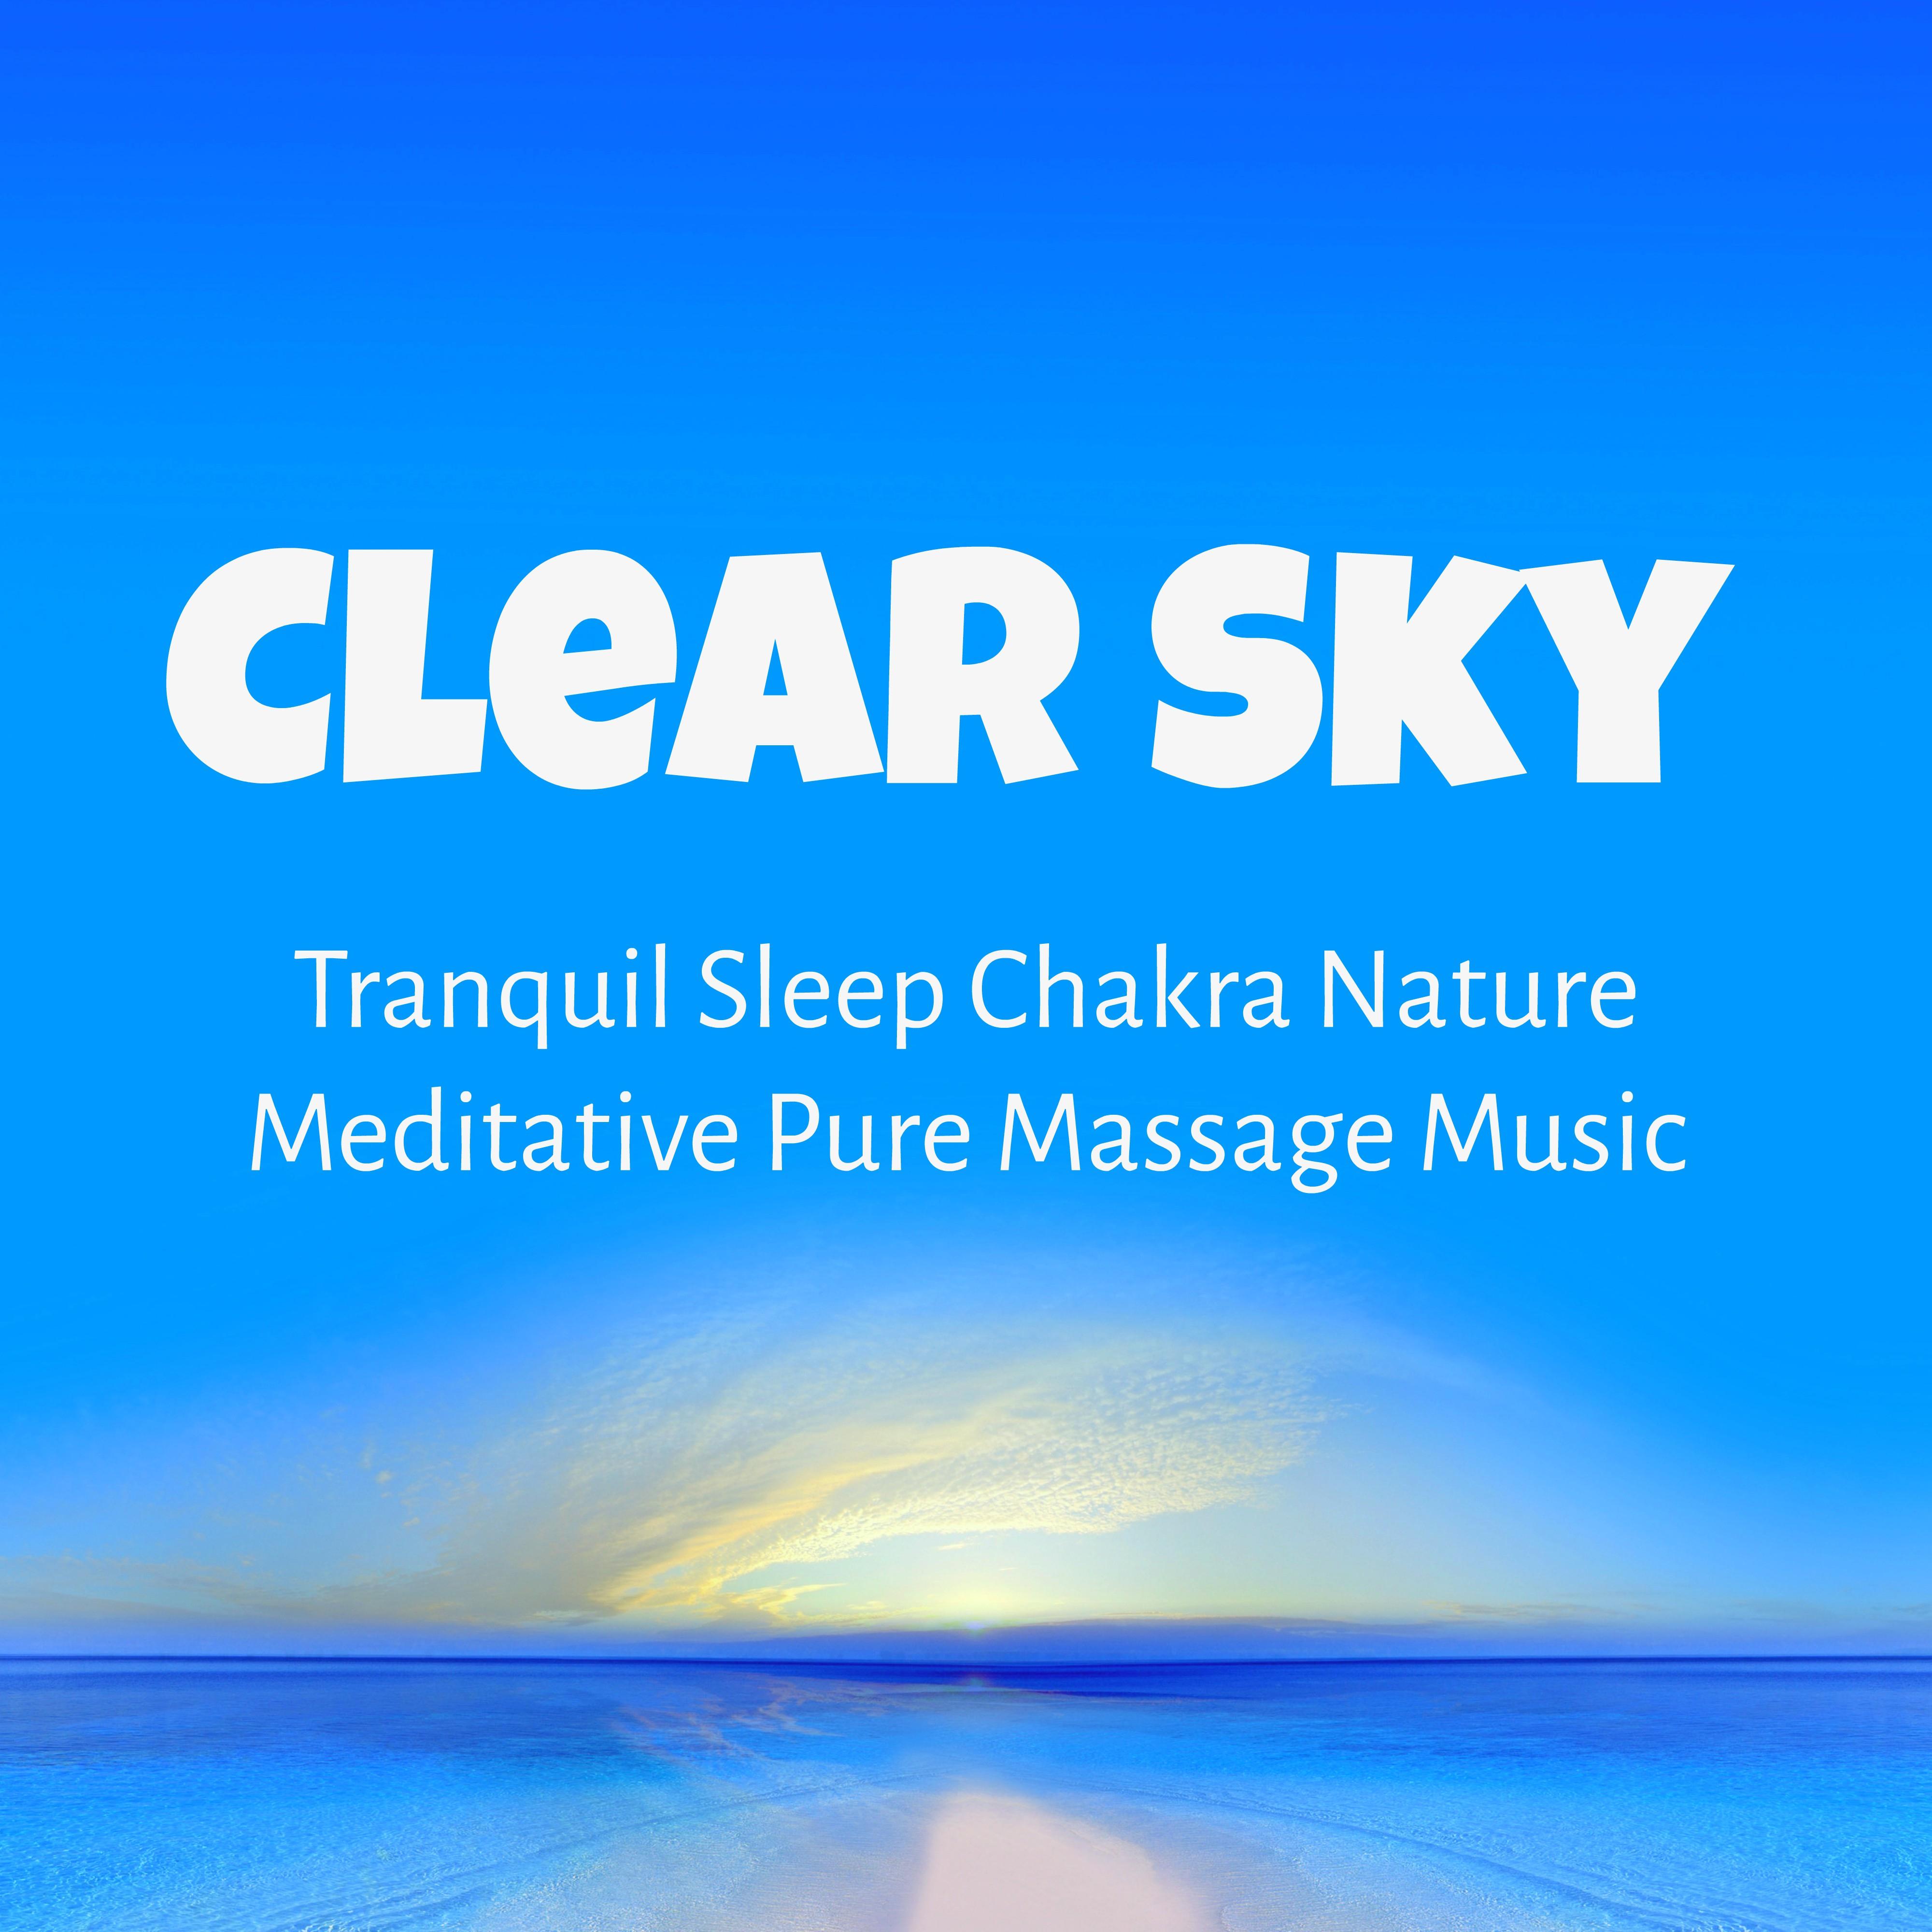 Clear Sky - Tranquil Sleep Chakra Nature Meditative Pure Massage Music with Instrumental Soft Relaxing Healing Sounds